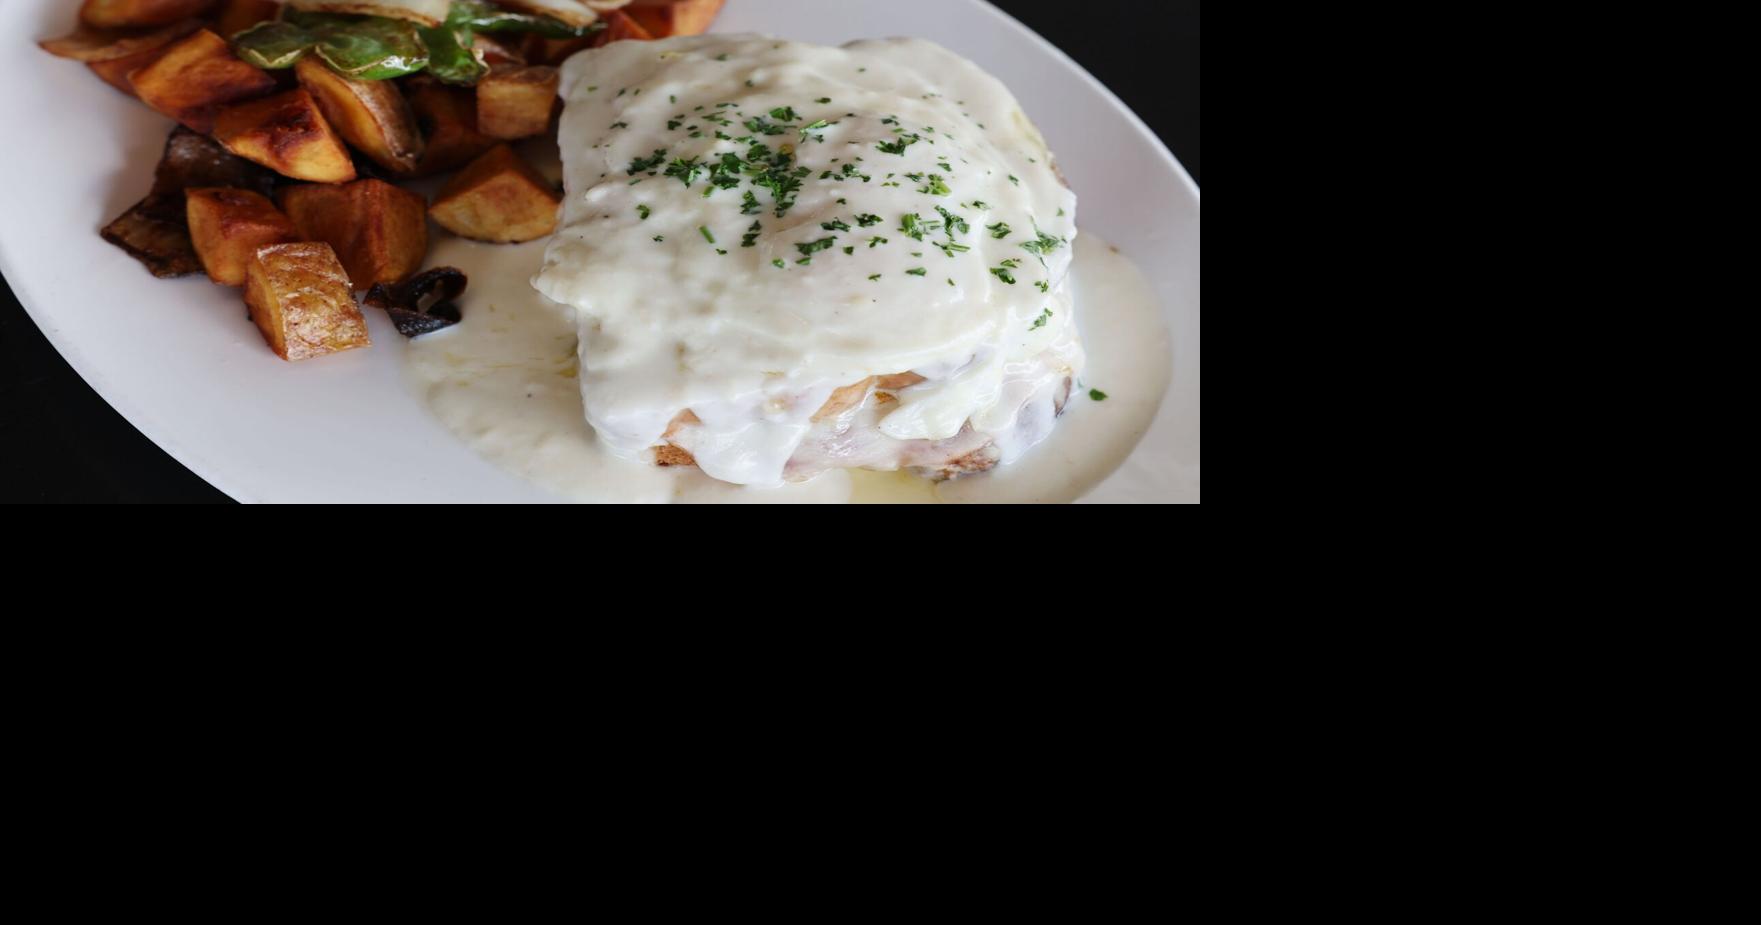 MK Bistro offers daily brunch and dinner in Brookside